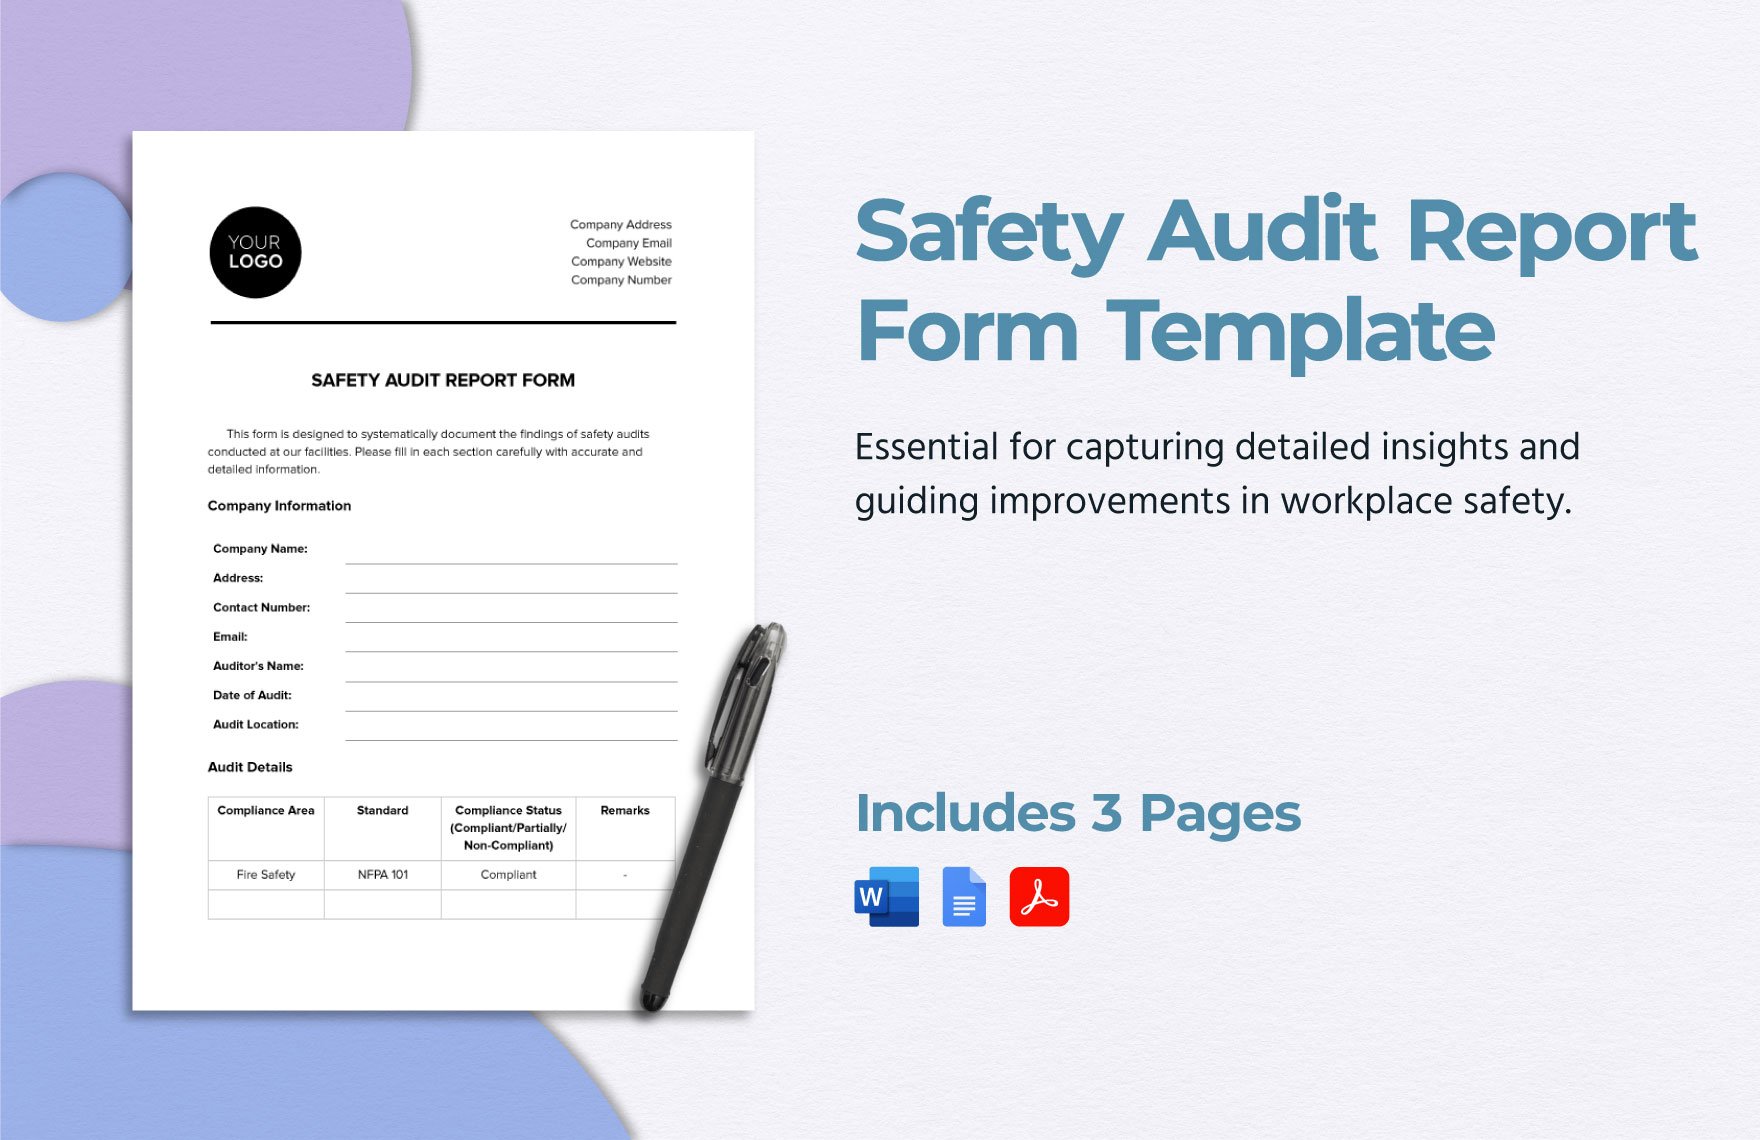 Safety Audit Report Form Template in Word, Google Docs, PDF